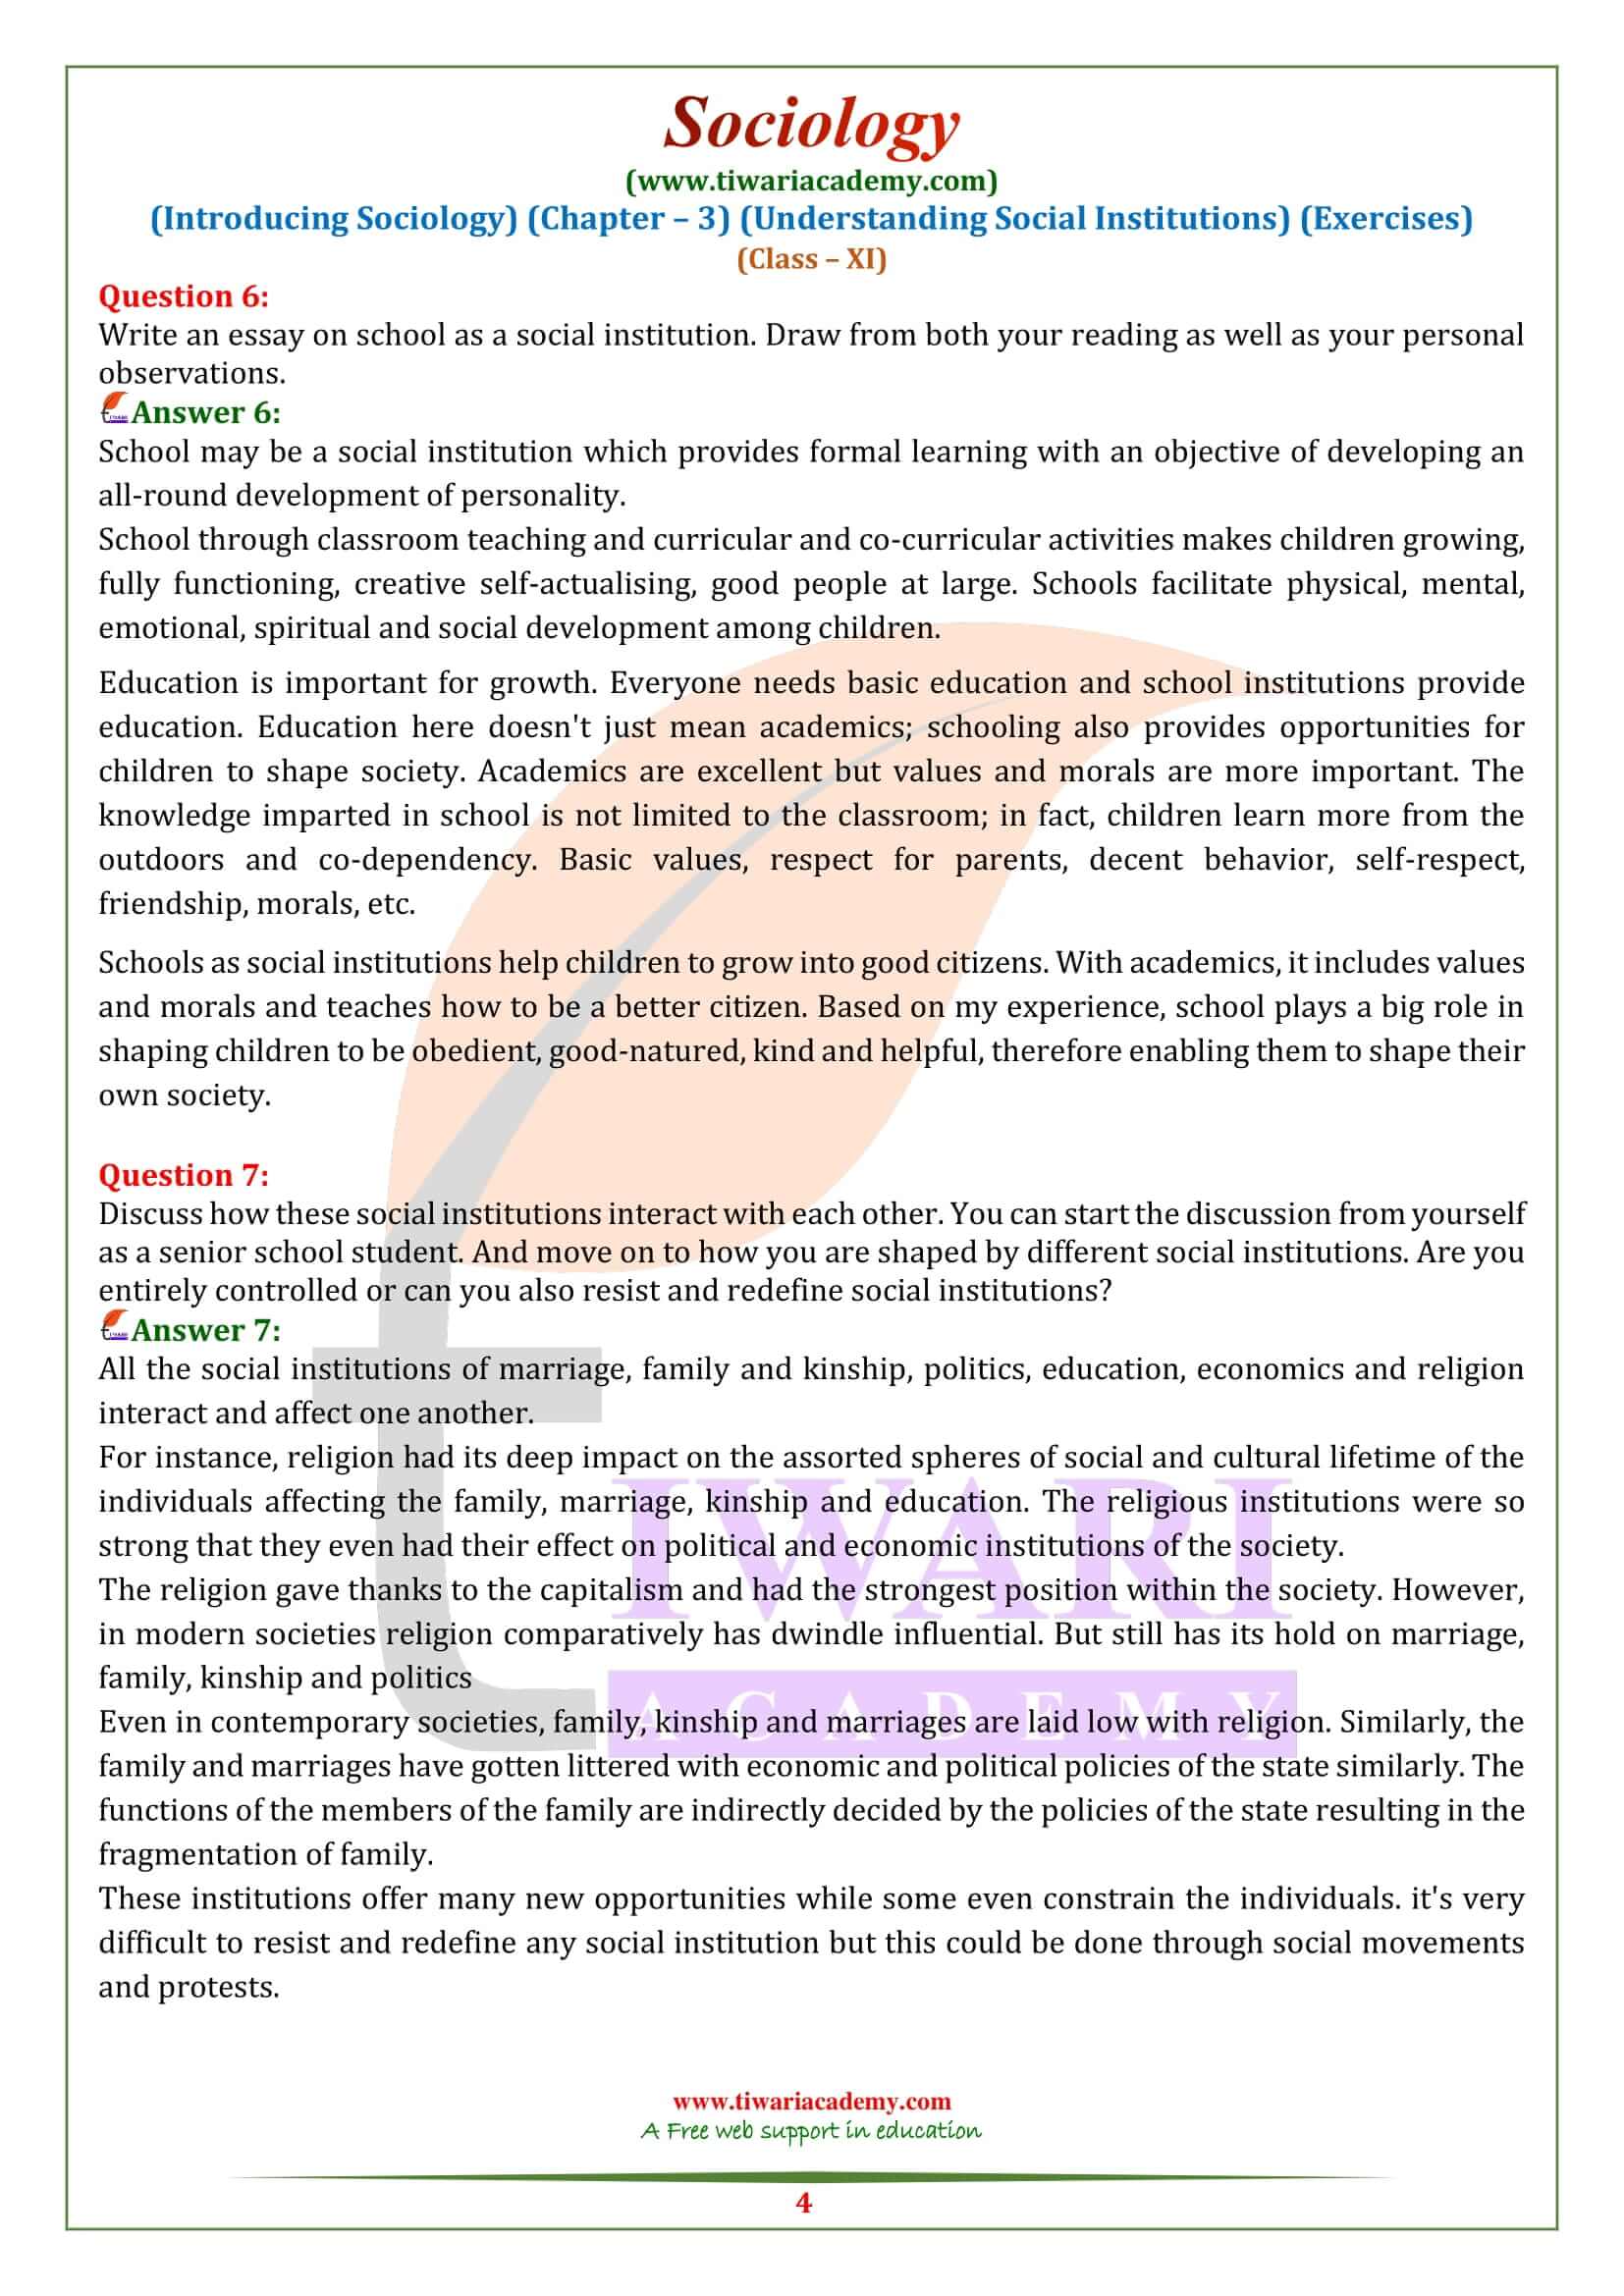 NCERT Solutions for Class 11 Sociology Chapter 3 free